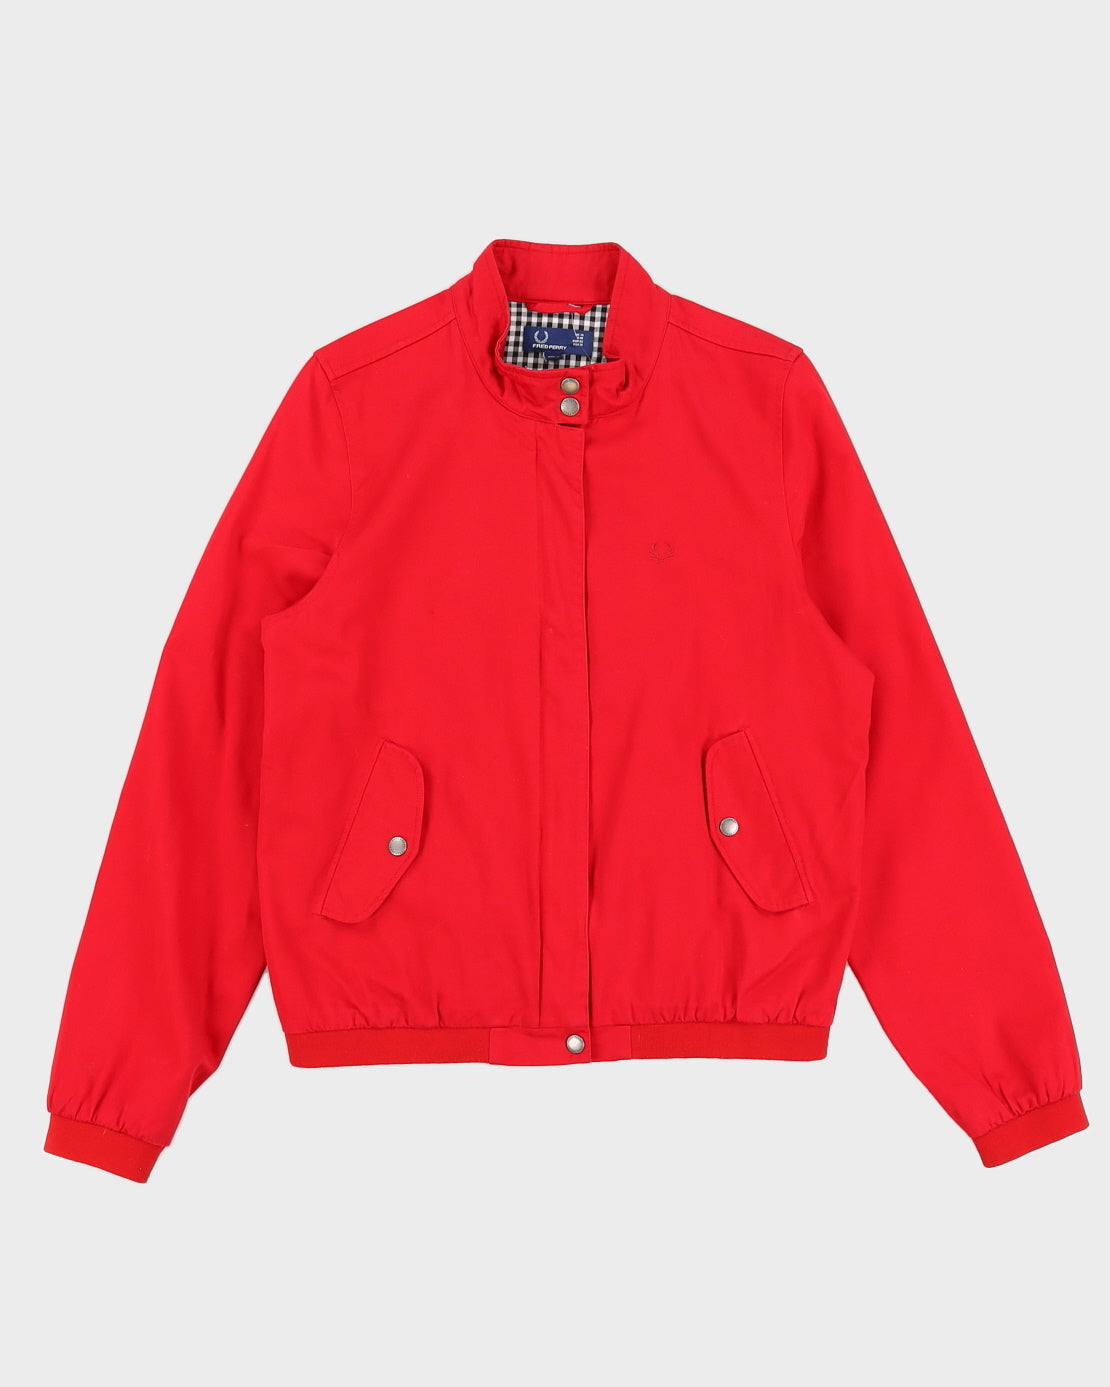 Fred Perry Red Harrington Jacket  - M